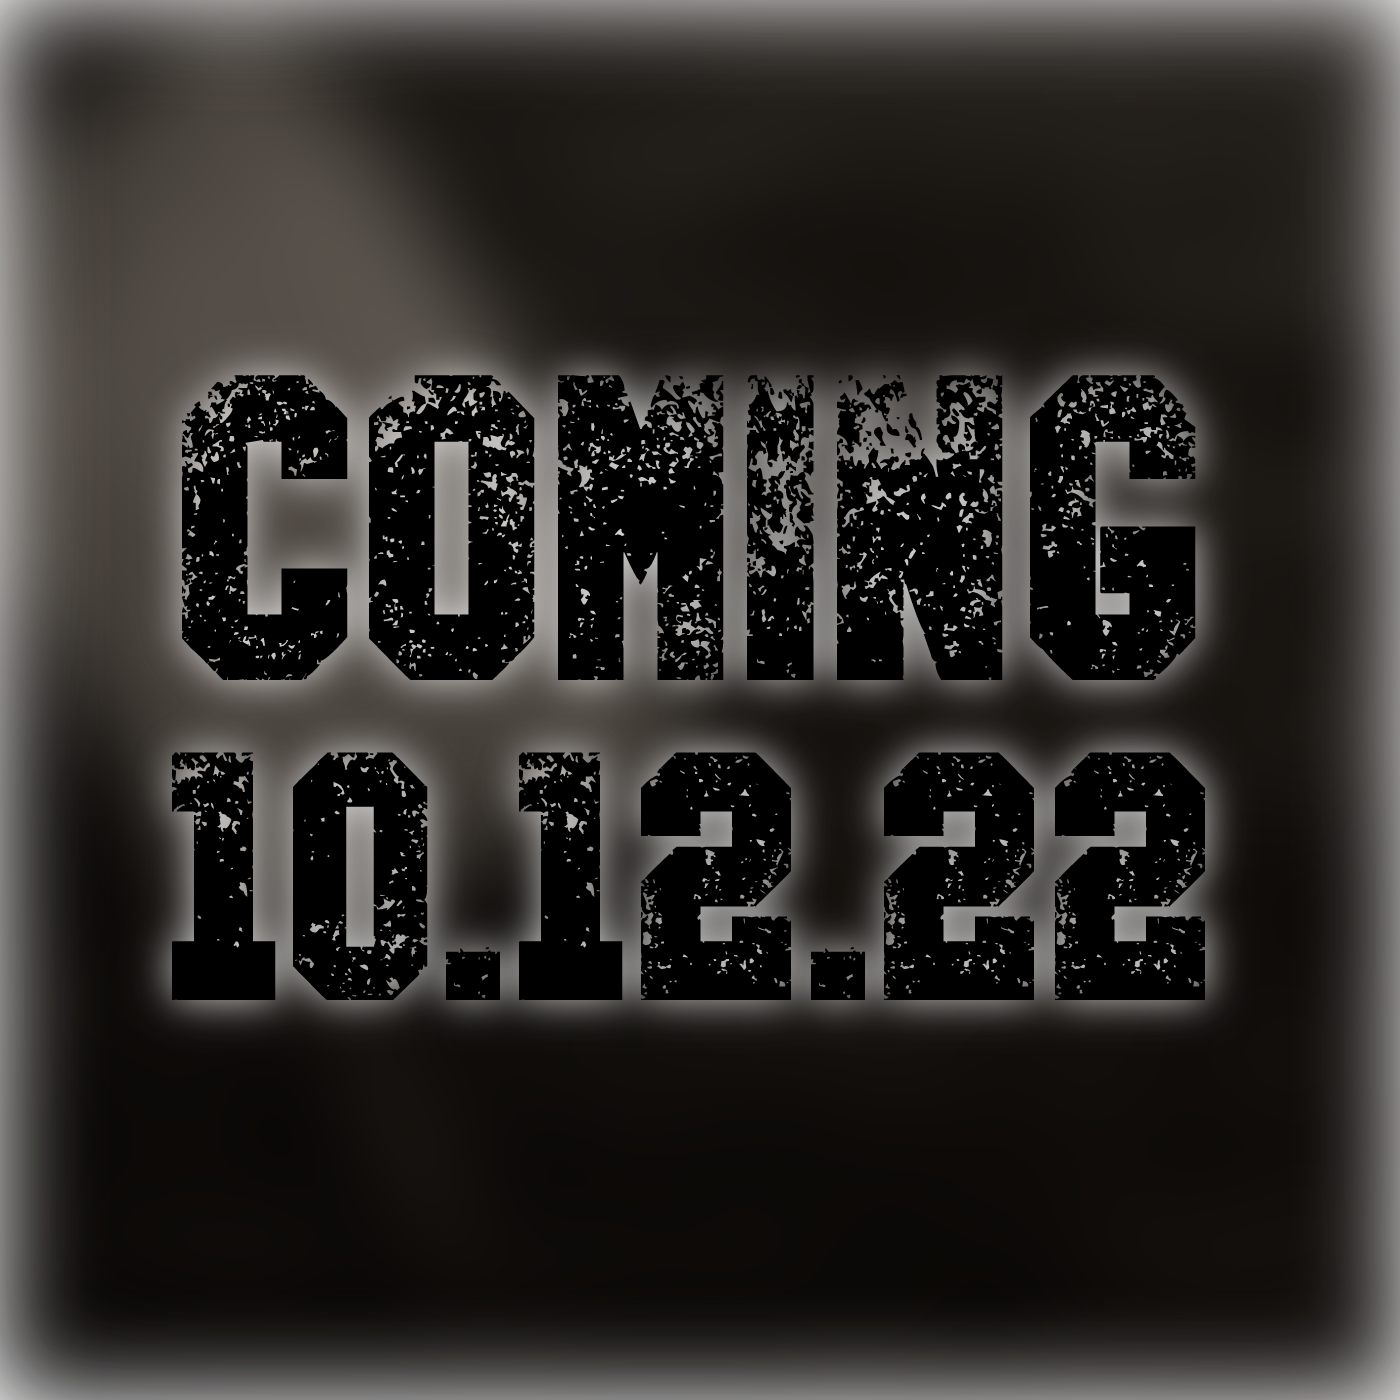 Coming 10.12.22